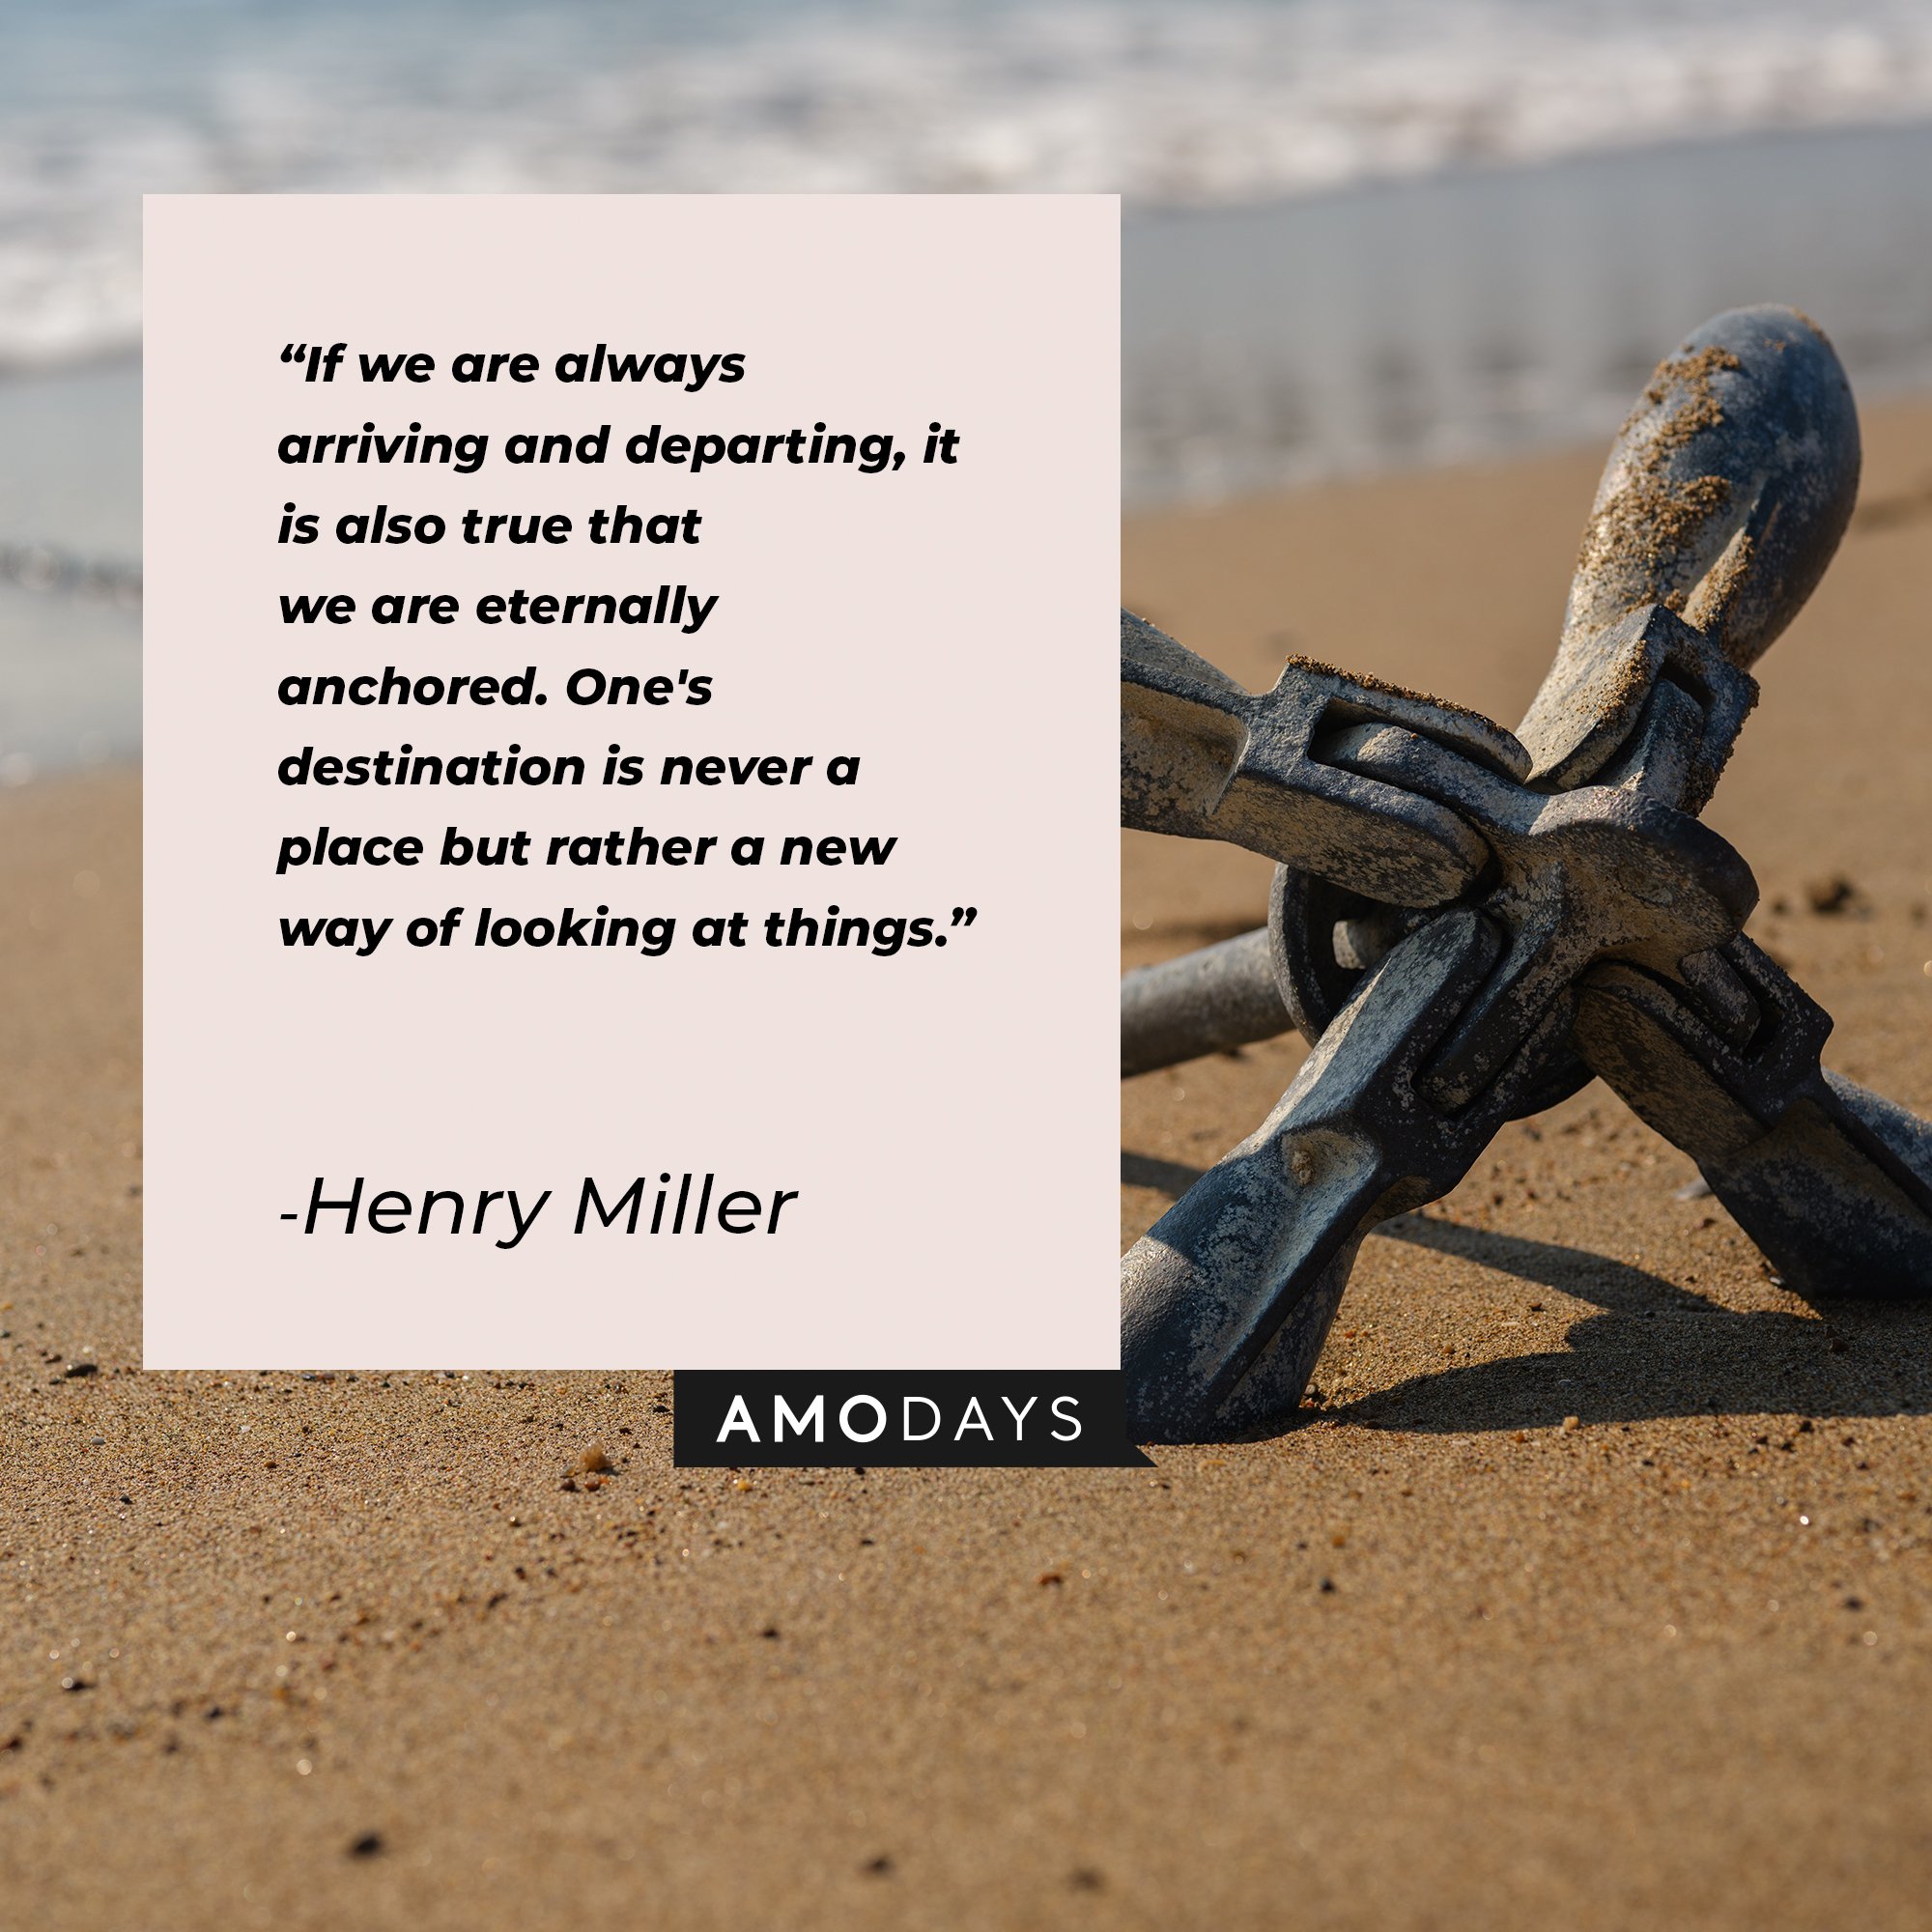 Henry Miller's quote: "If we are always arriving and departing, it is also true that we are eternally anchored. One's destination is never a place but rather a new way of looking at things." | Image: AmoDays